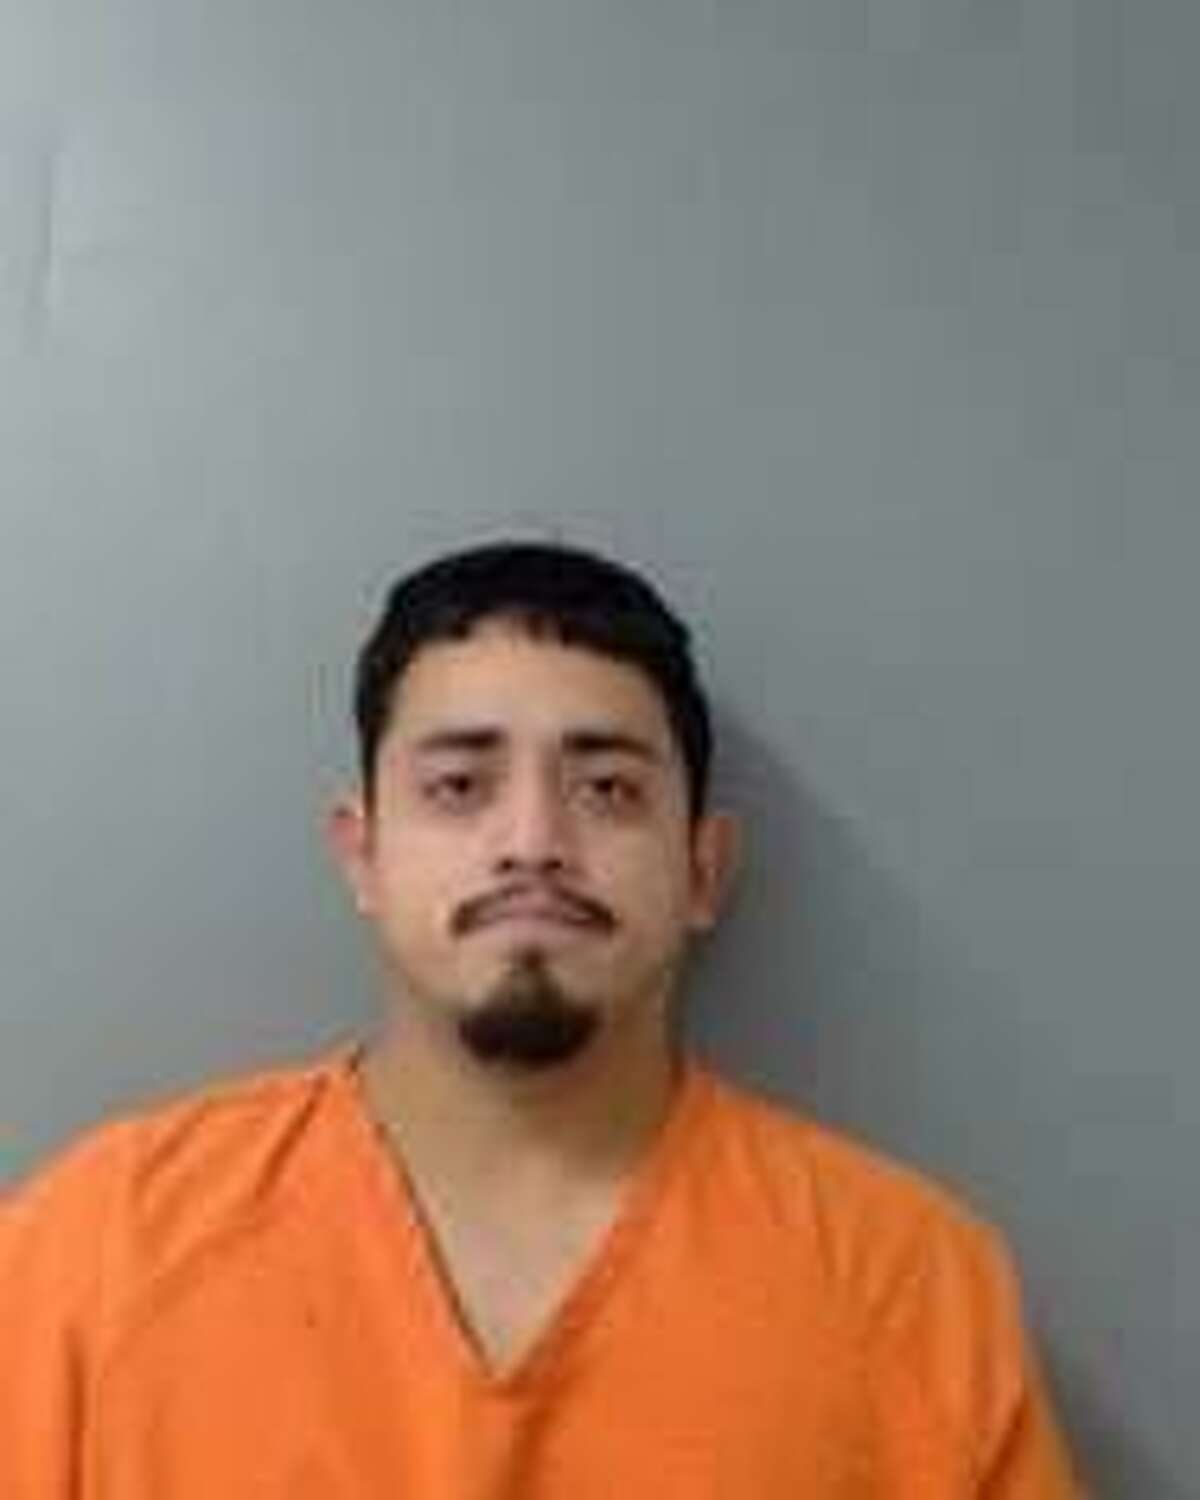 Jose Luis Garcia, 28, was arrested for allegedly stabbing a man with a kitchen knife.